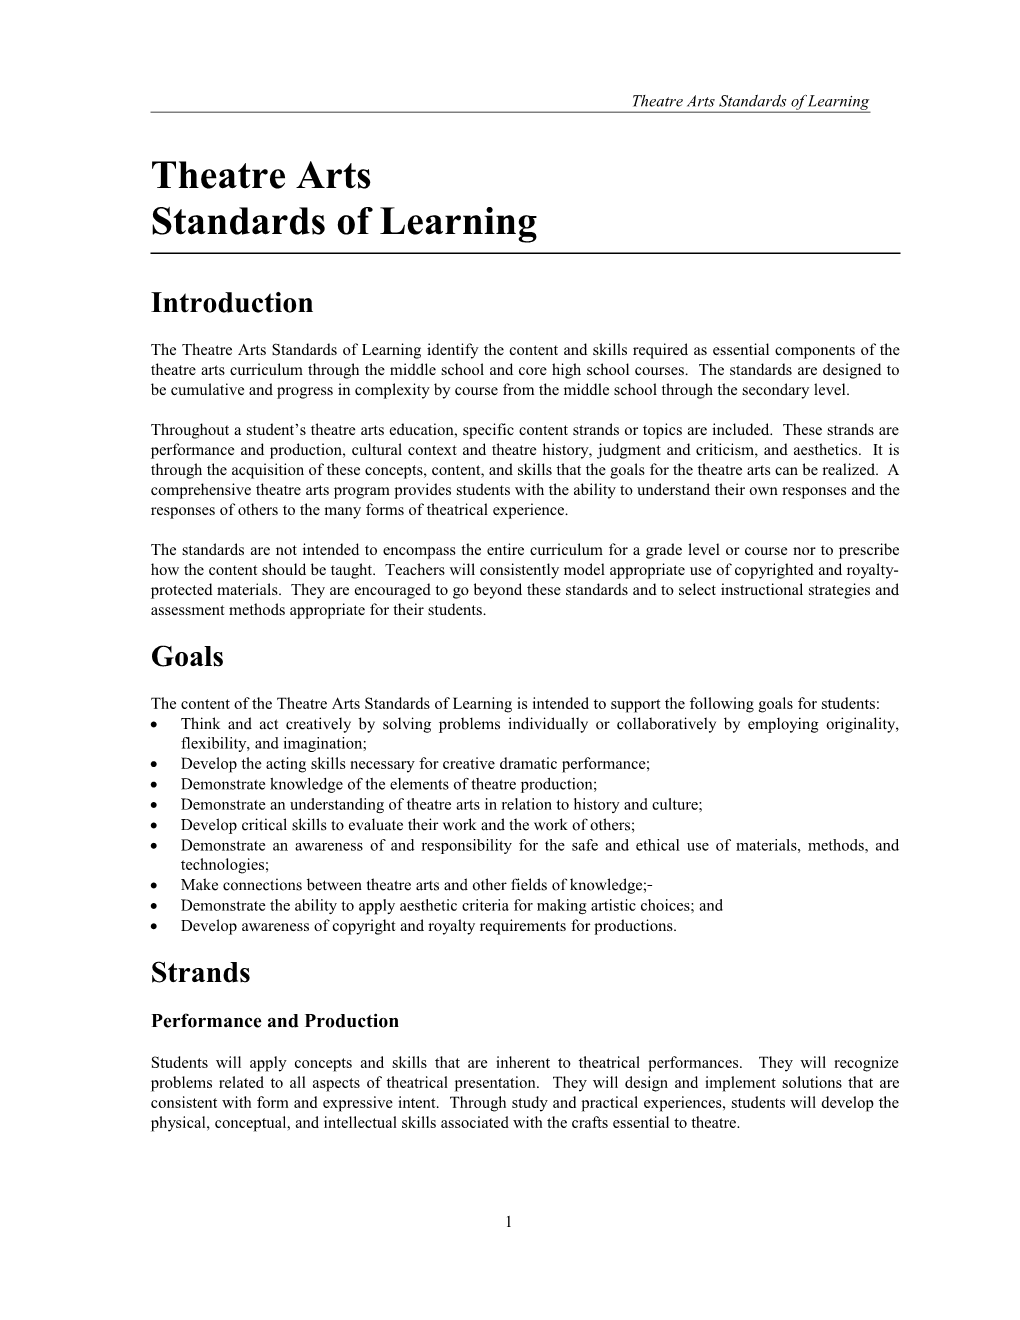 Theatre Arts Standards of Learning